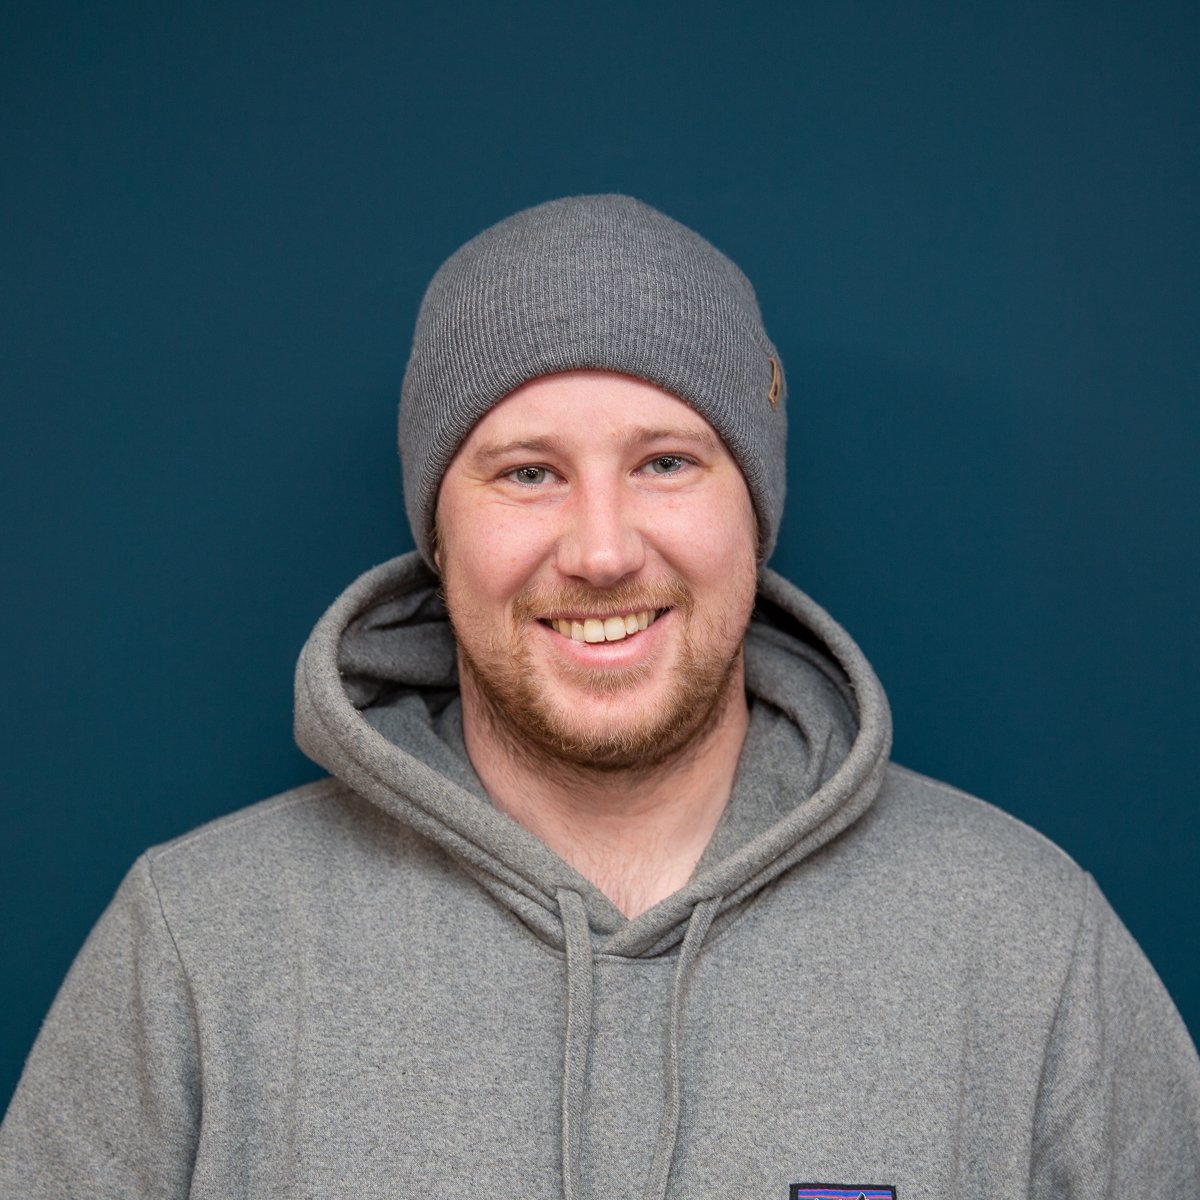 A smiling man in a gray hoodie and beanie against a blue background, representing an AV company.